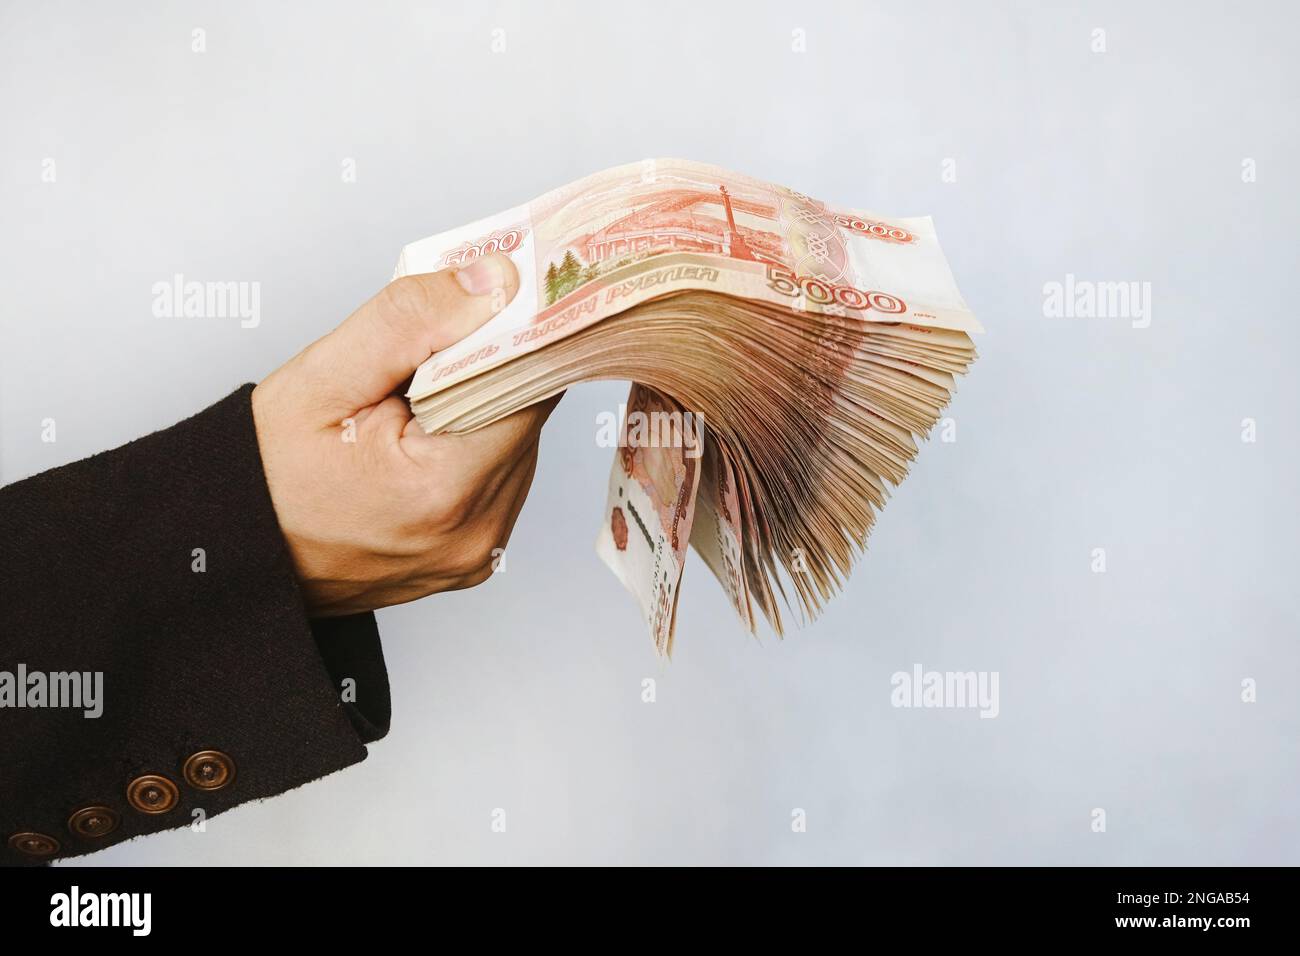 a lot of money in the hand of a young businessman on a blue background. A stack of banknotes of Russian rubles with a face value of 5000 rubles. succe Stock Photo